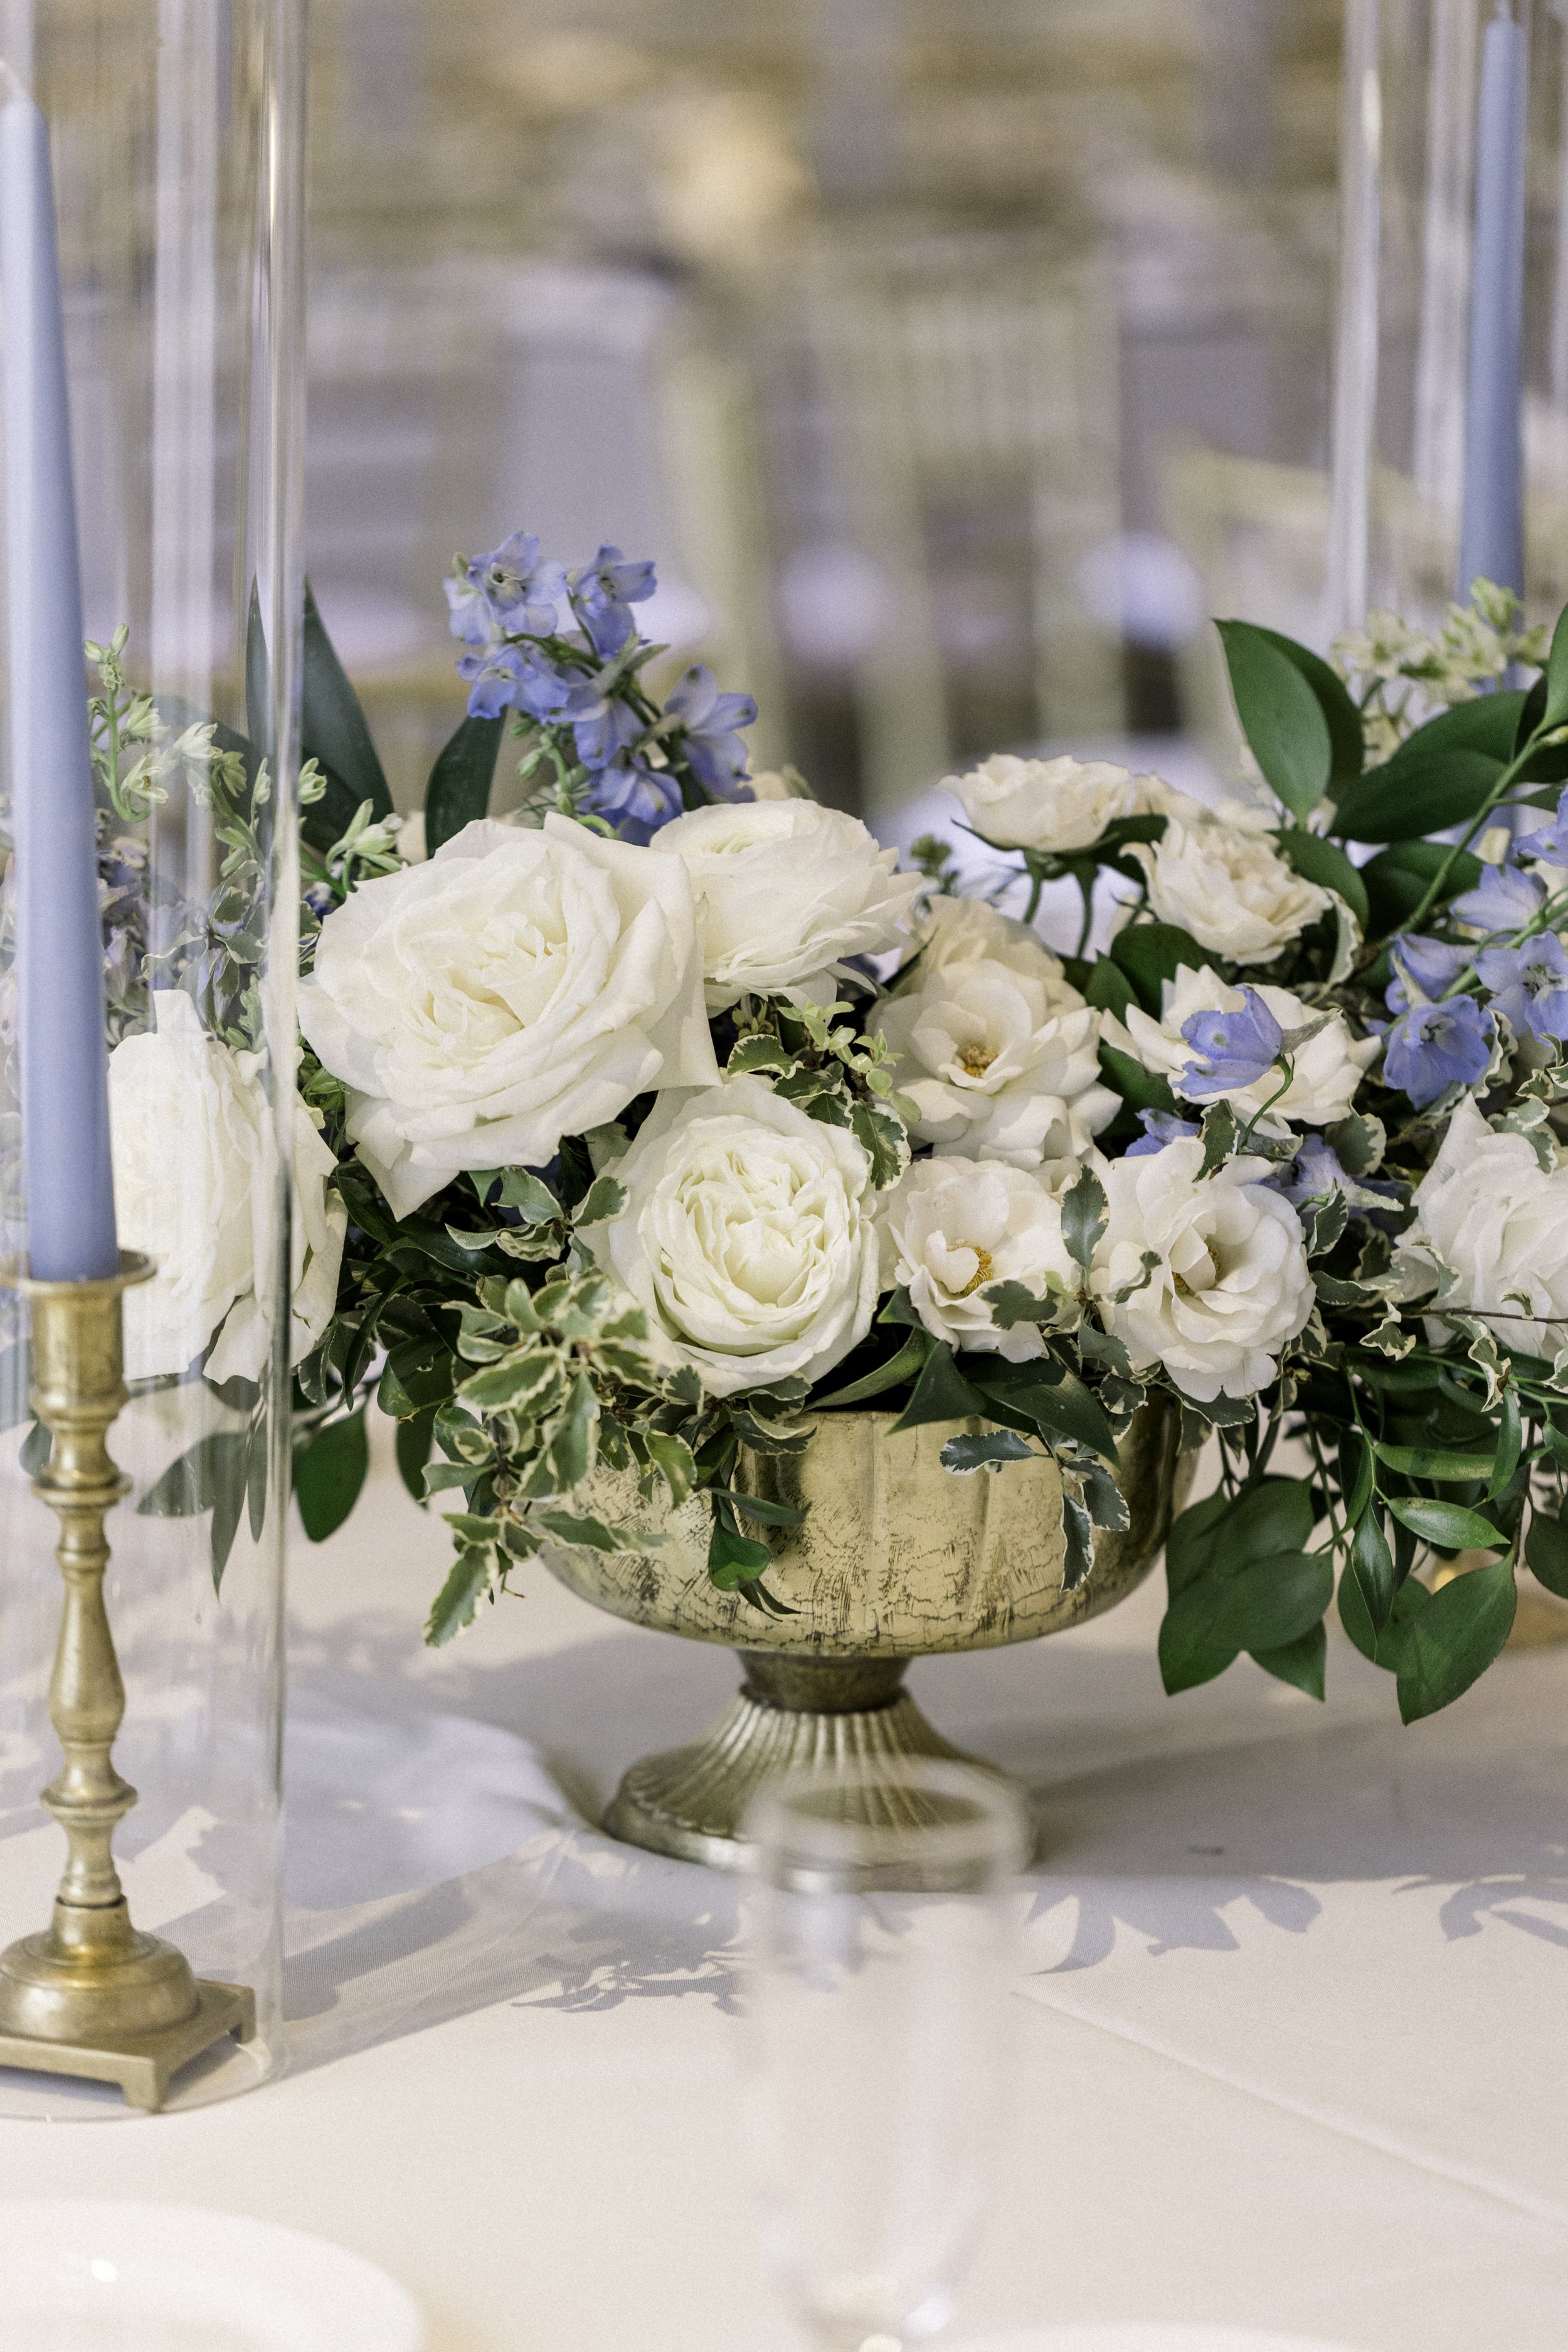 madison-and-rufus-chic-southern-wedding-at-the-westin-savannah-harbor-with-a-summery-white-and-blue-color-palette-planned-by-savannah-wedding-planner-and-florist-ivory-and-beau-30.jpg